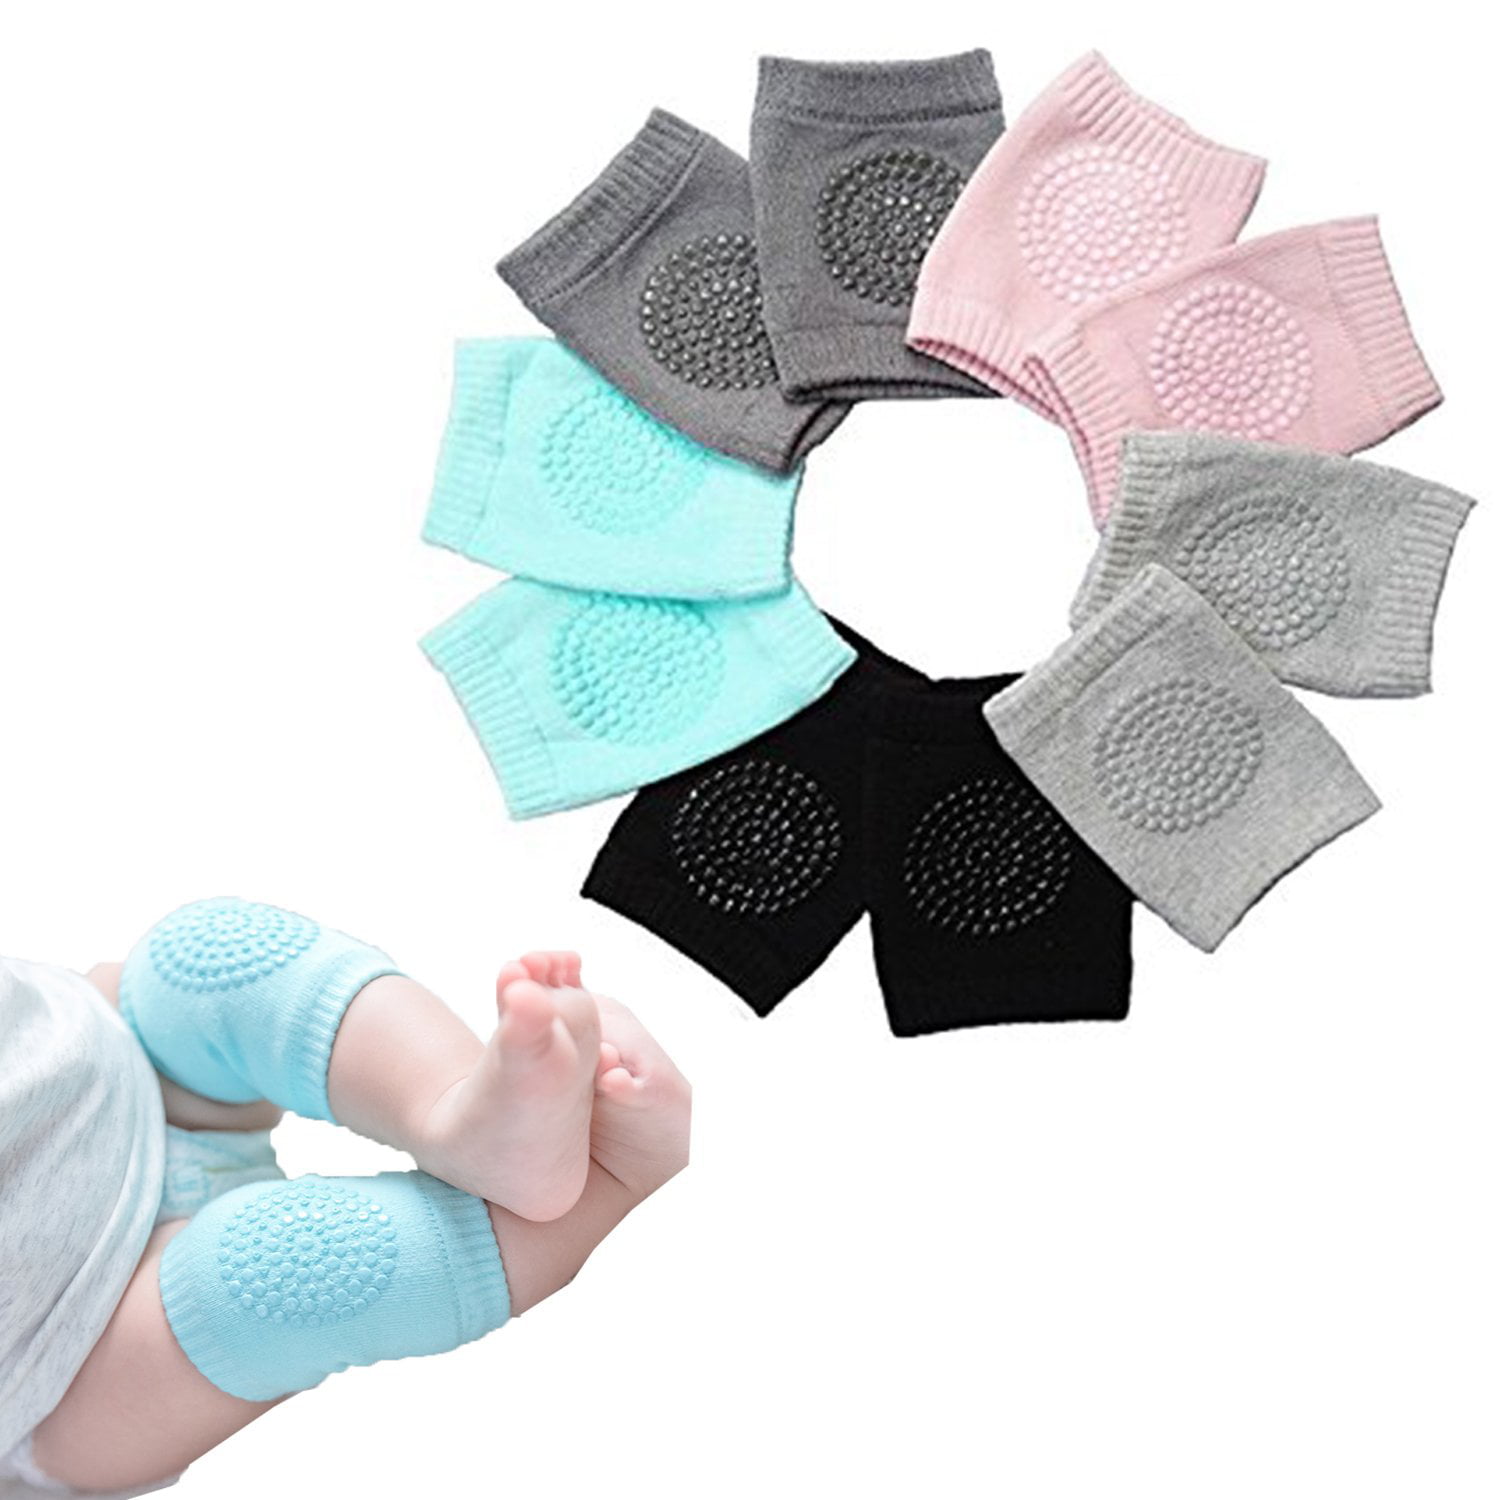 Baby Toddler Safe Short Knee Pad Crawling Protective Child Kneepad Socks Cover W 